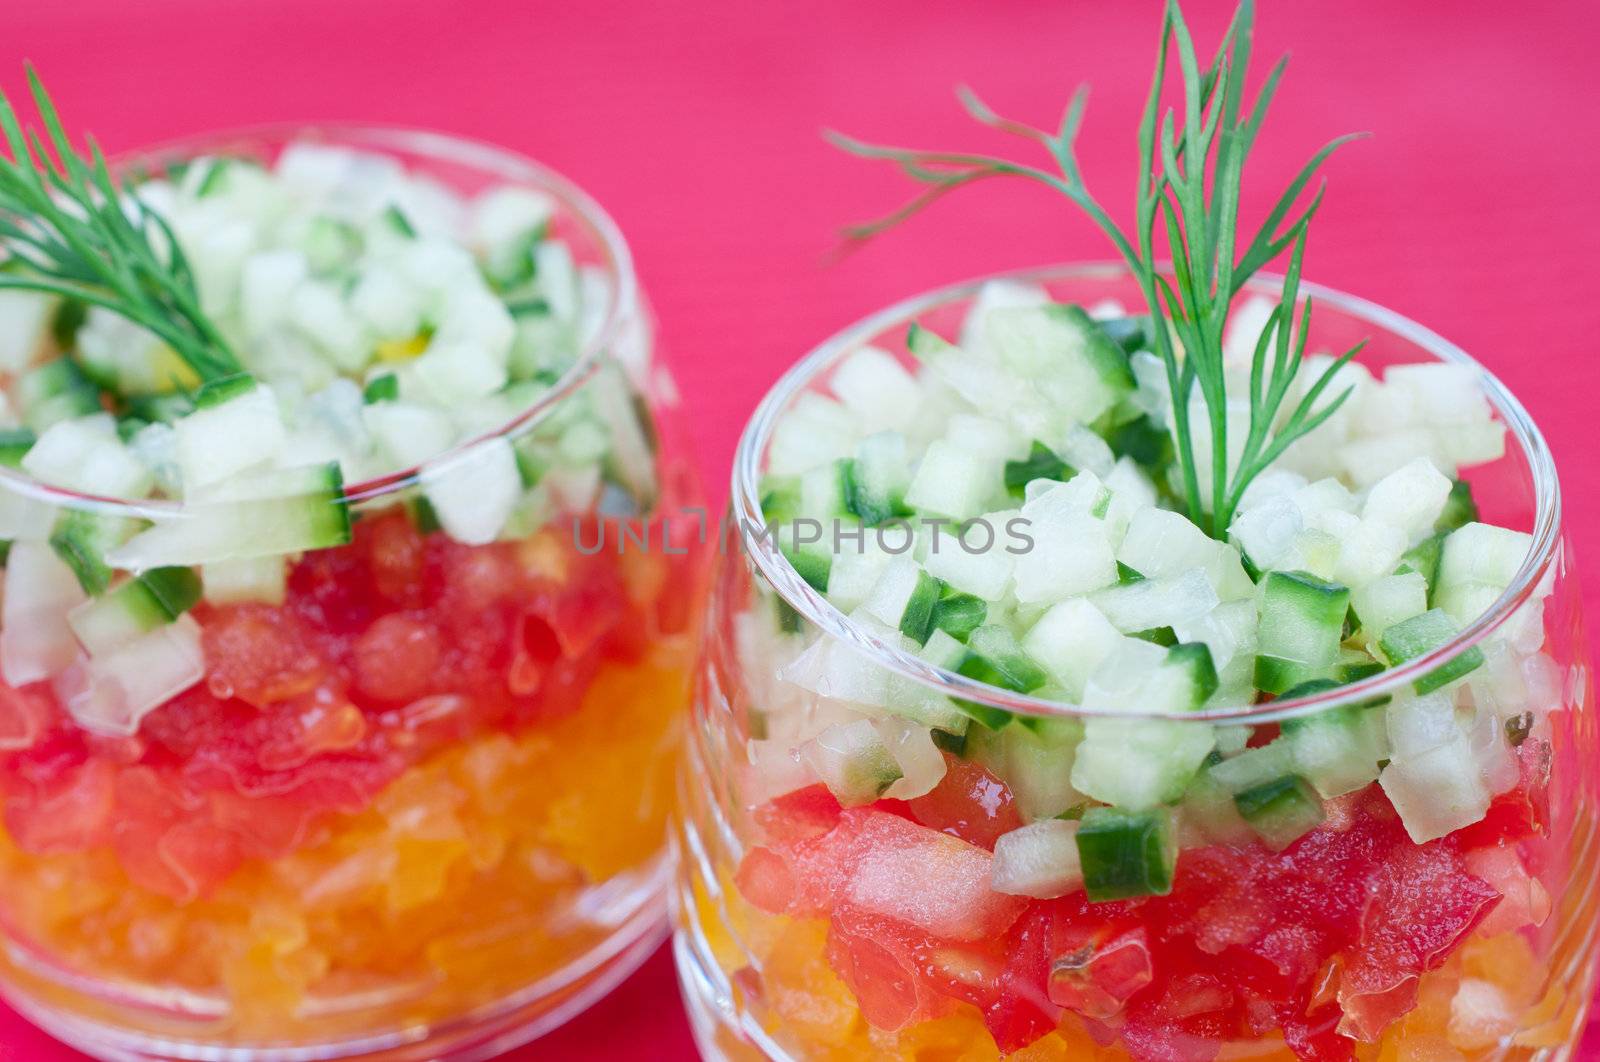 Vegetable salad with cucumber, tomato and pepper by Nanisimova